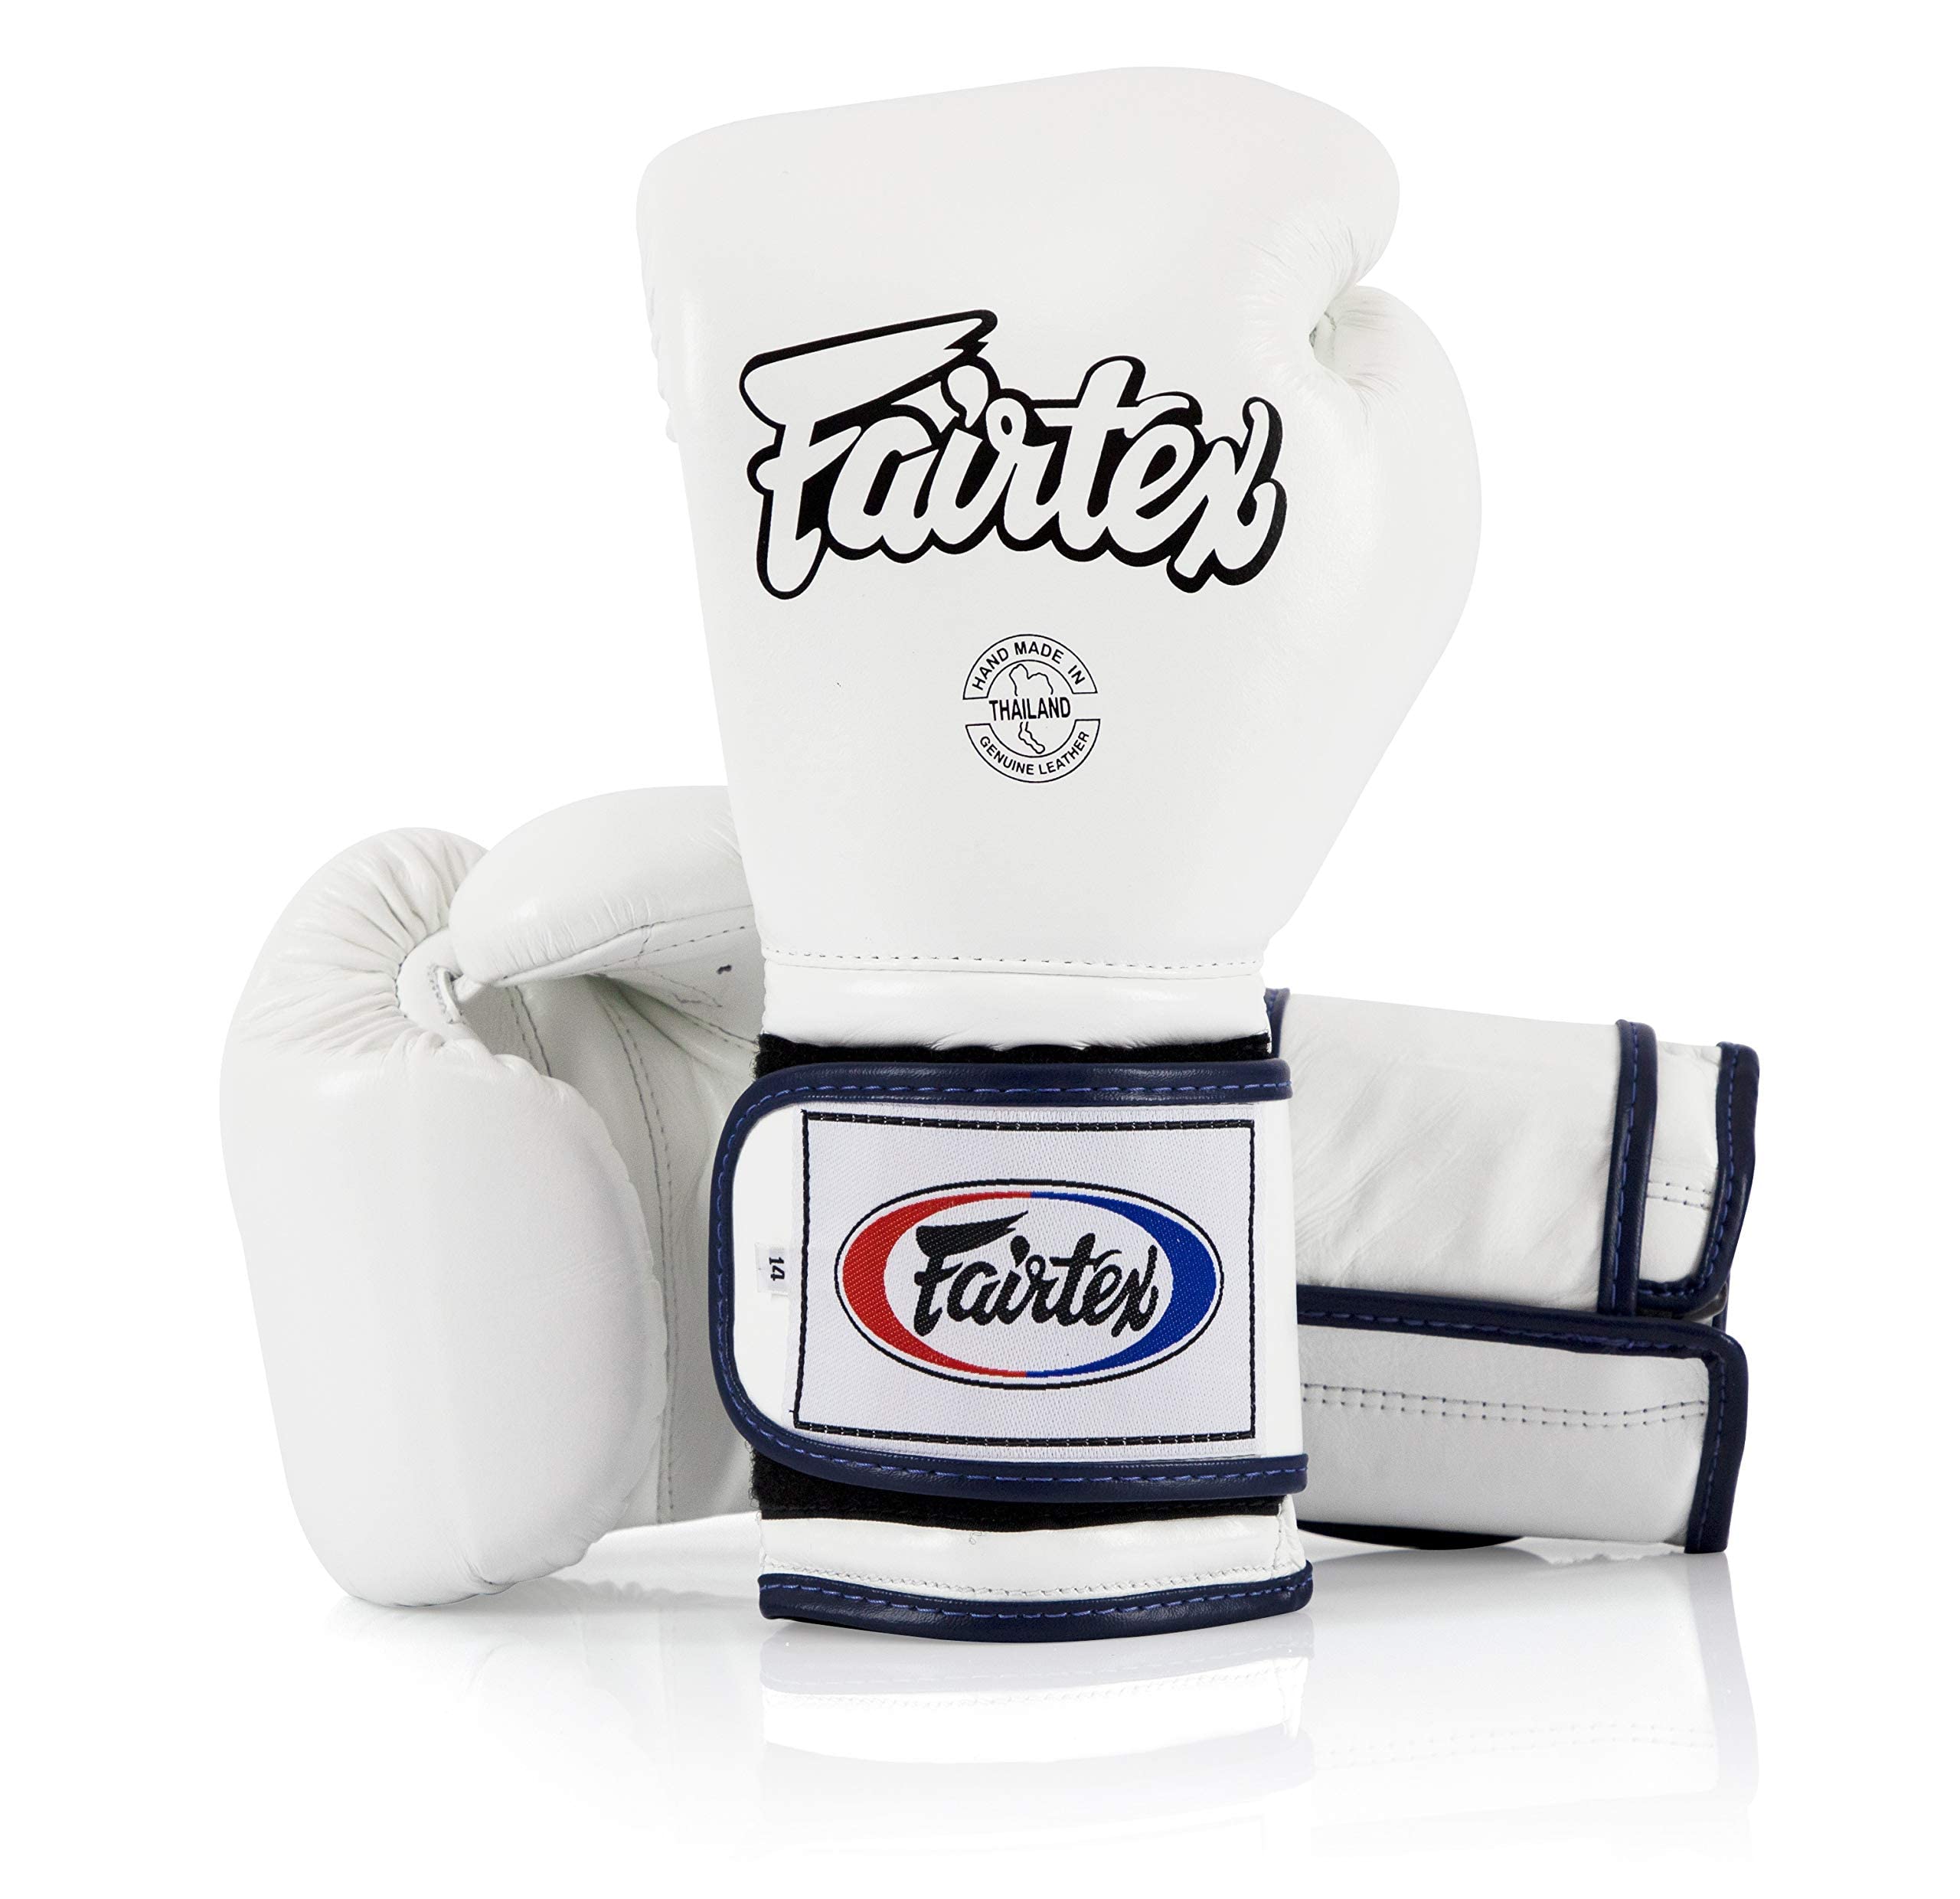 Mua Fairtex BGV9 Muay Thai for Professional Boxers  Trainers |Mexican  Style Glove for Hard Hitters MMA Gloves for Martial Arts|Light Weight   Shock Absorbent Boxing Gloves trên Amazon Mỹ chính